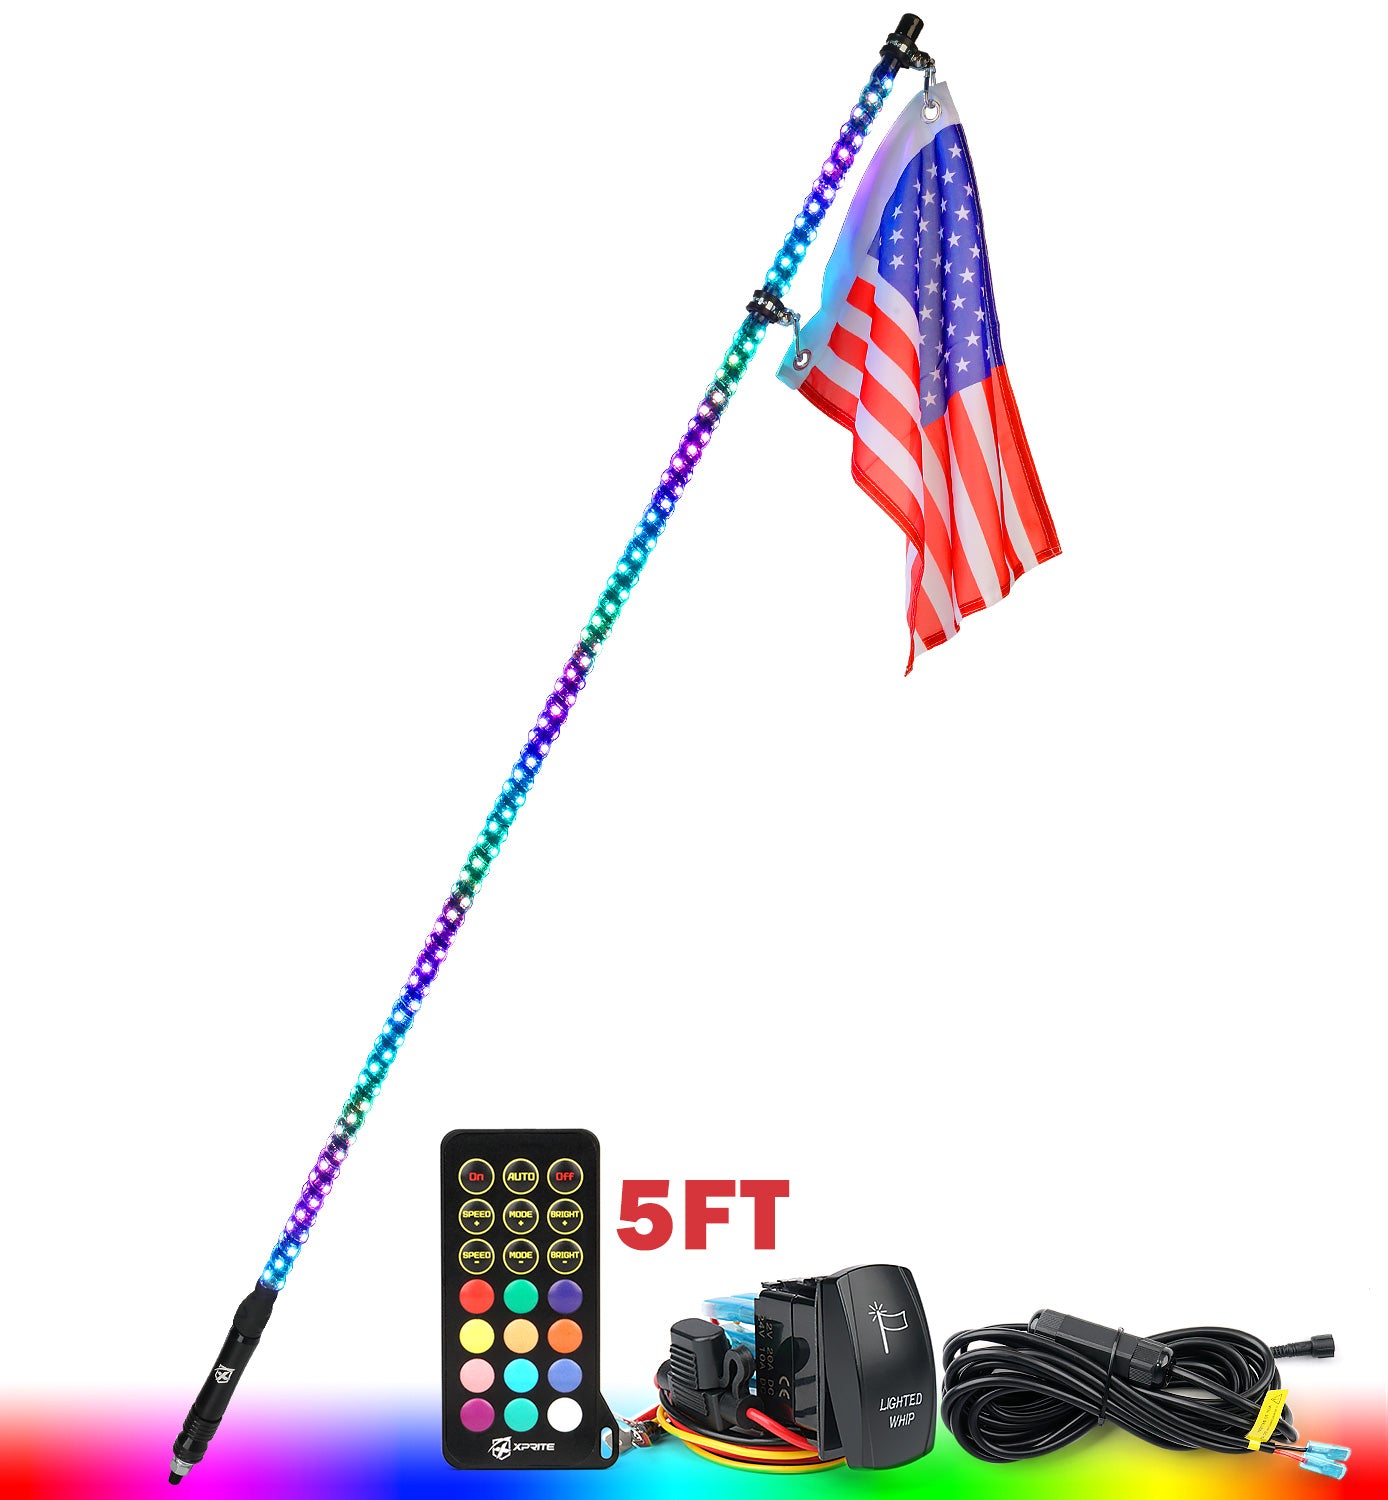 Spiral RGB LED Flag Pole Whip Light with Remote Control | Monsoon Series